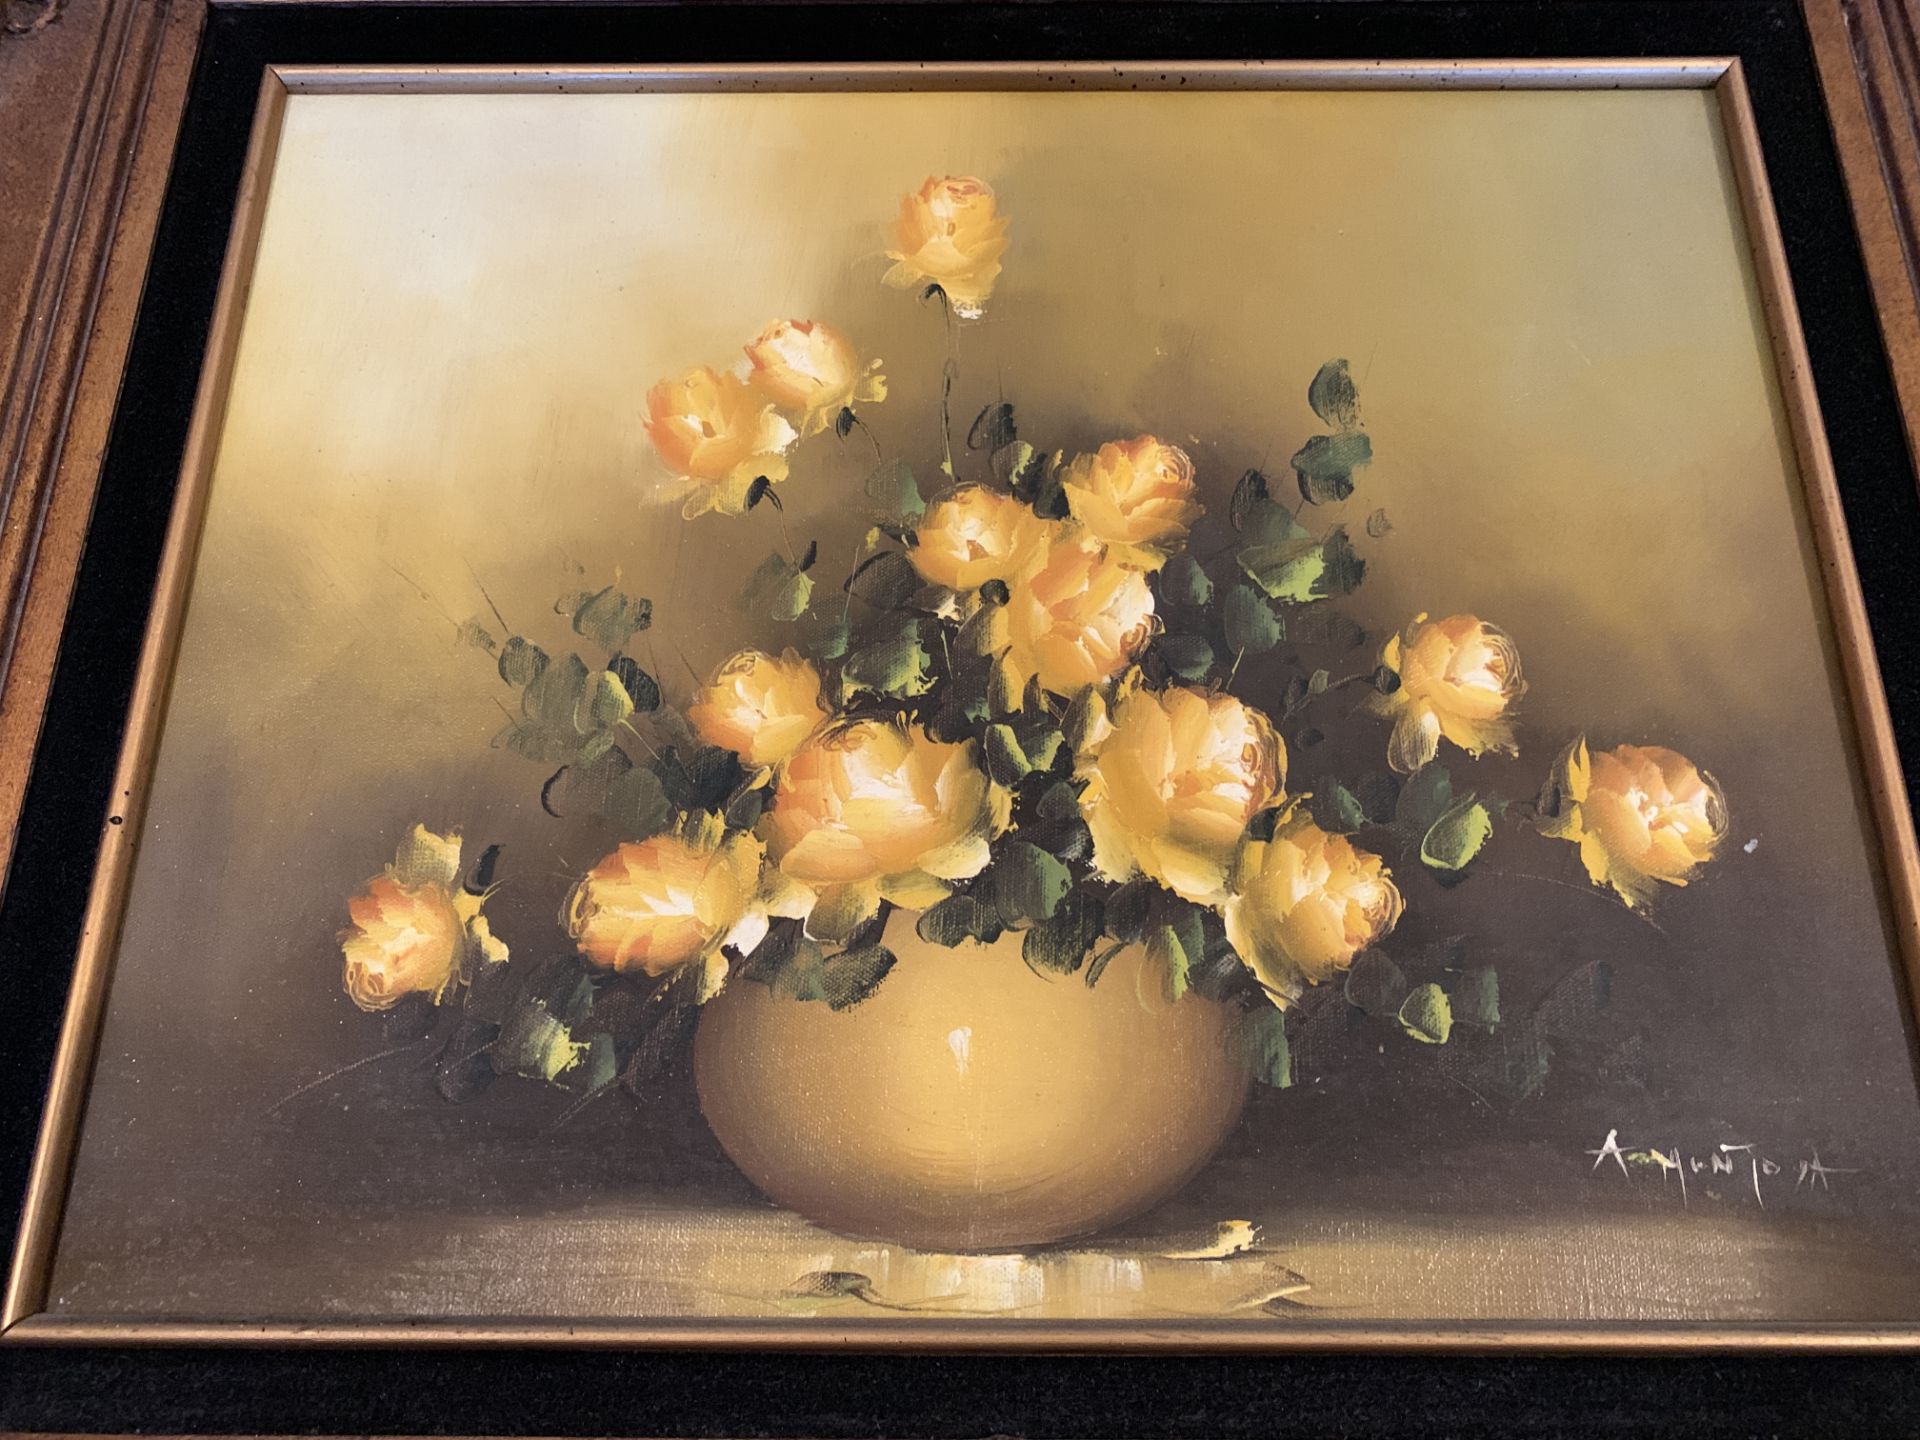 THICK FRAMED FLORAL ART PIECE, YELLOW FLOWERS IN VASE. DIMENSIONS: 28X31.5" - Image 2 of 3